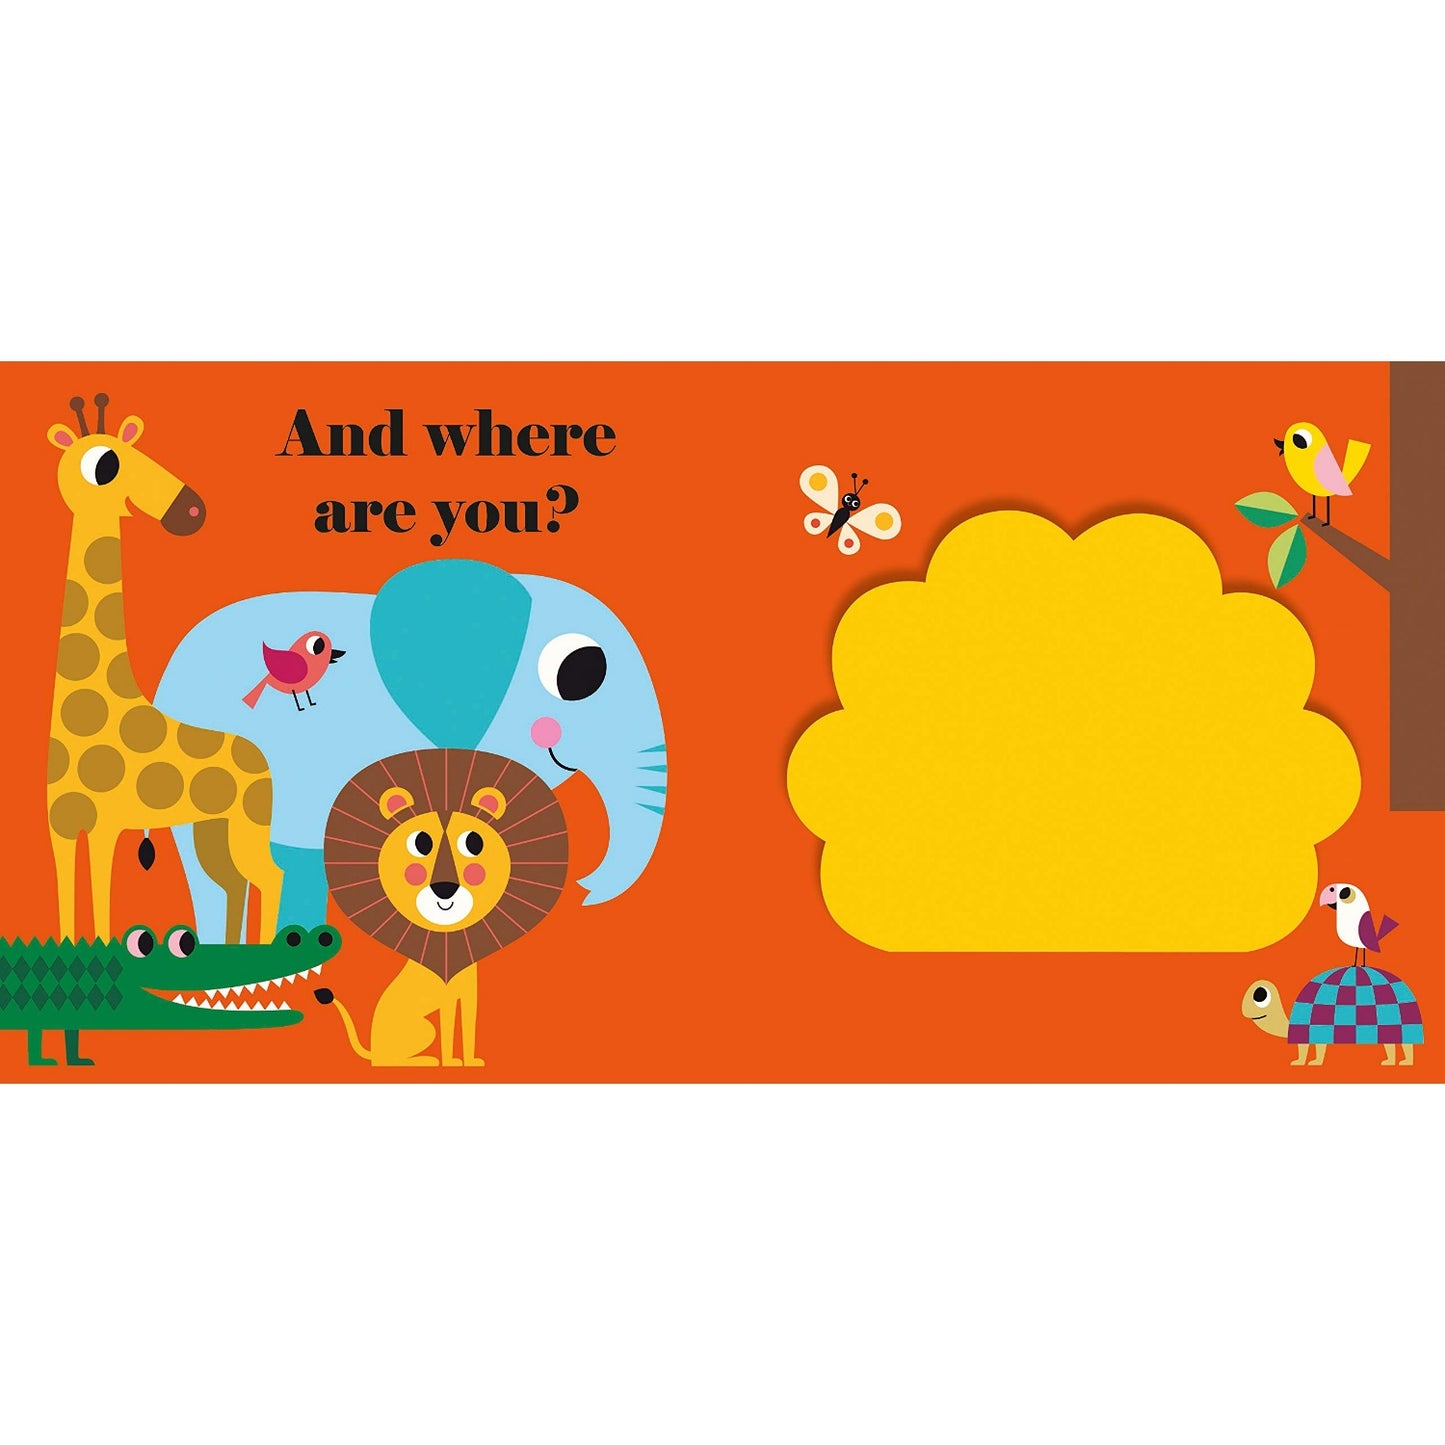 Where's Mr Lion? | Felt Flaps Board Book for Babies & Toddlers